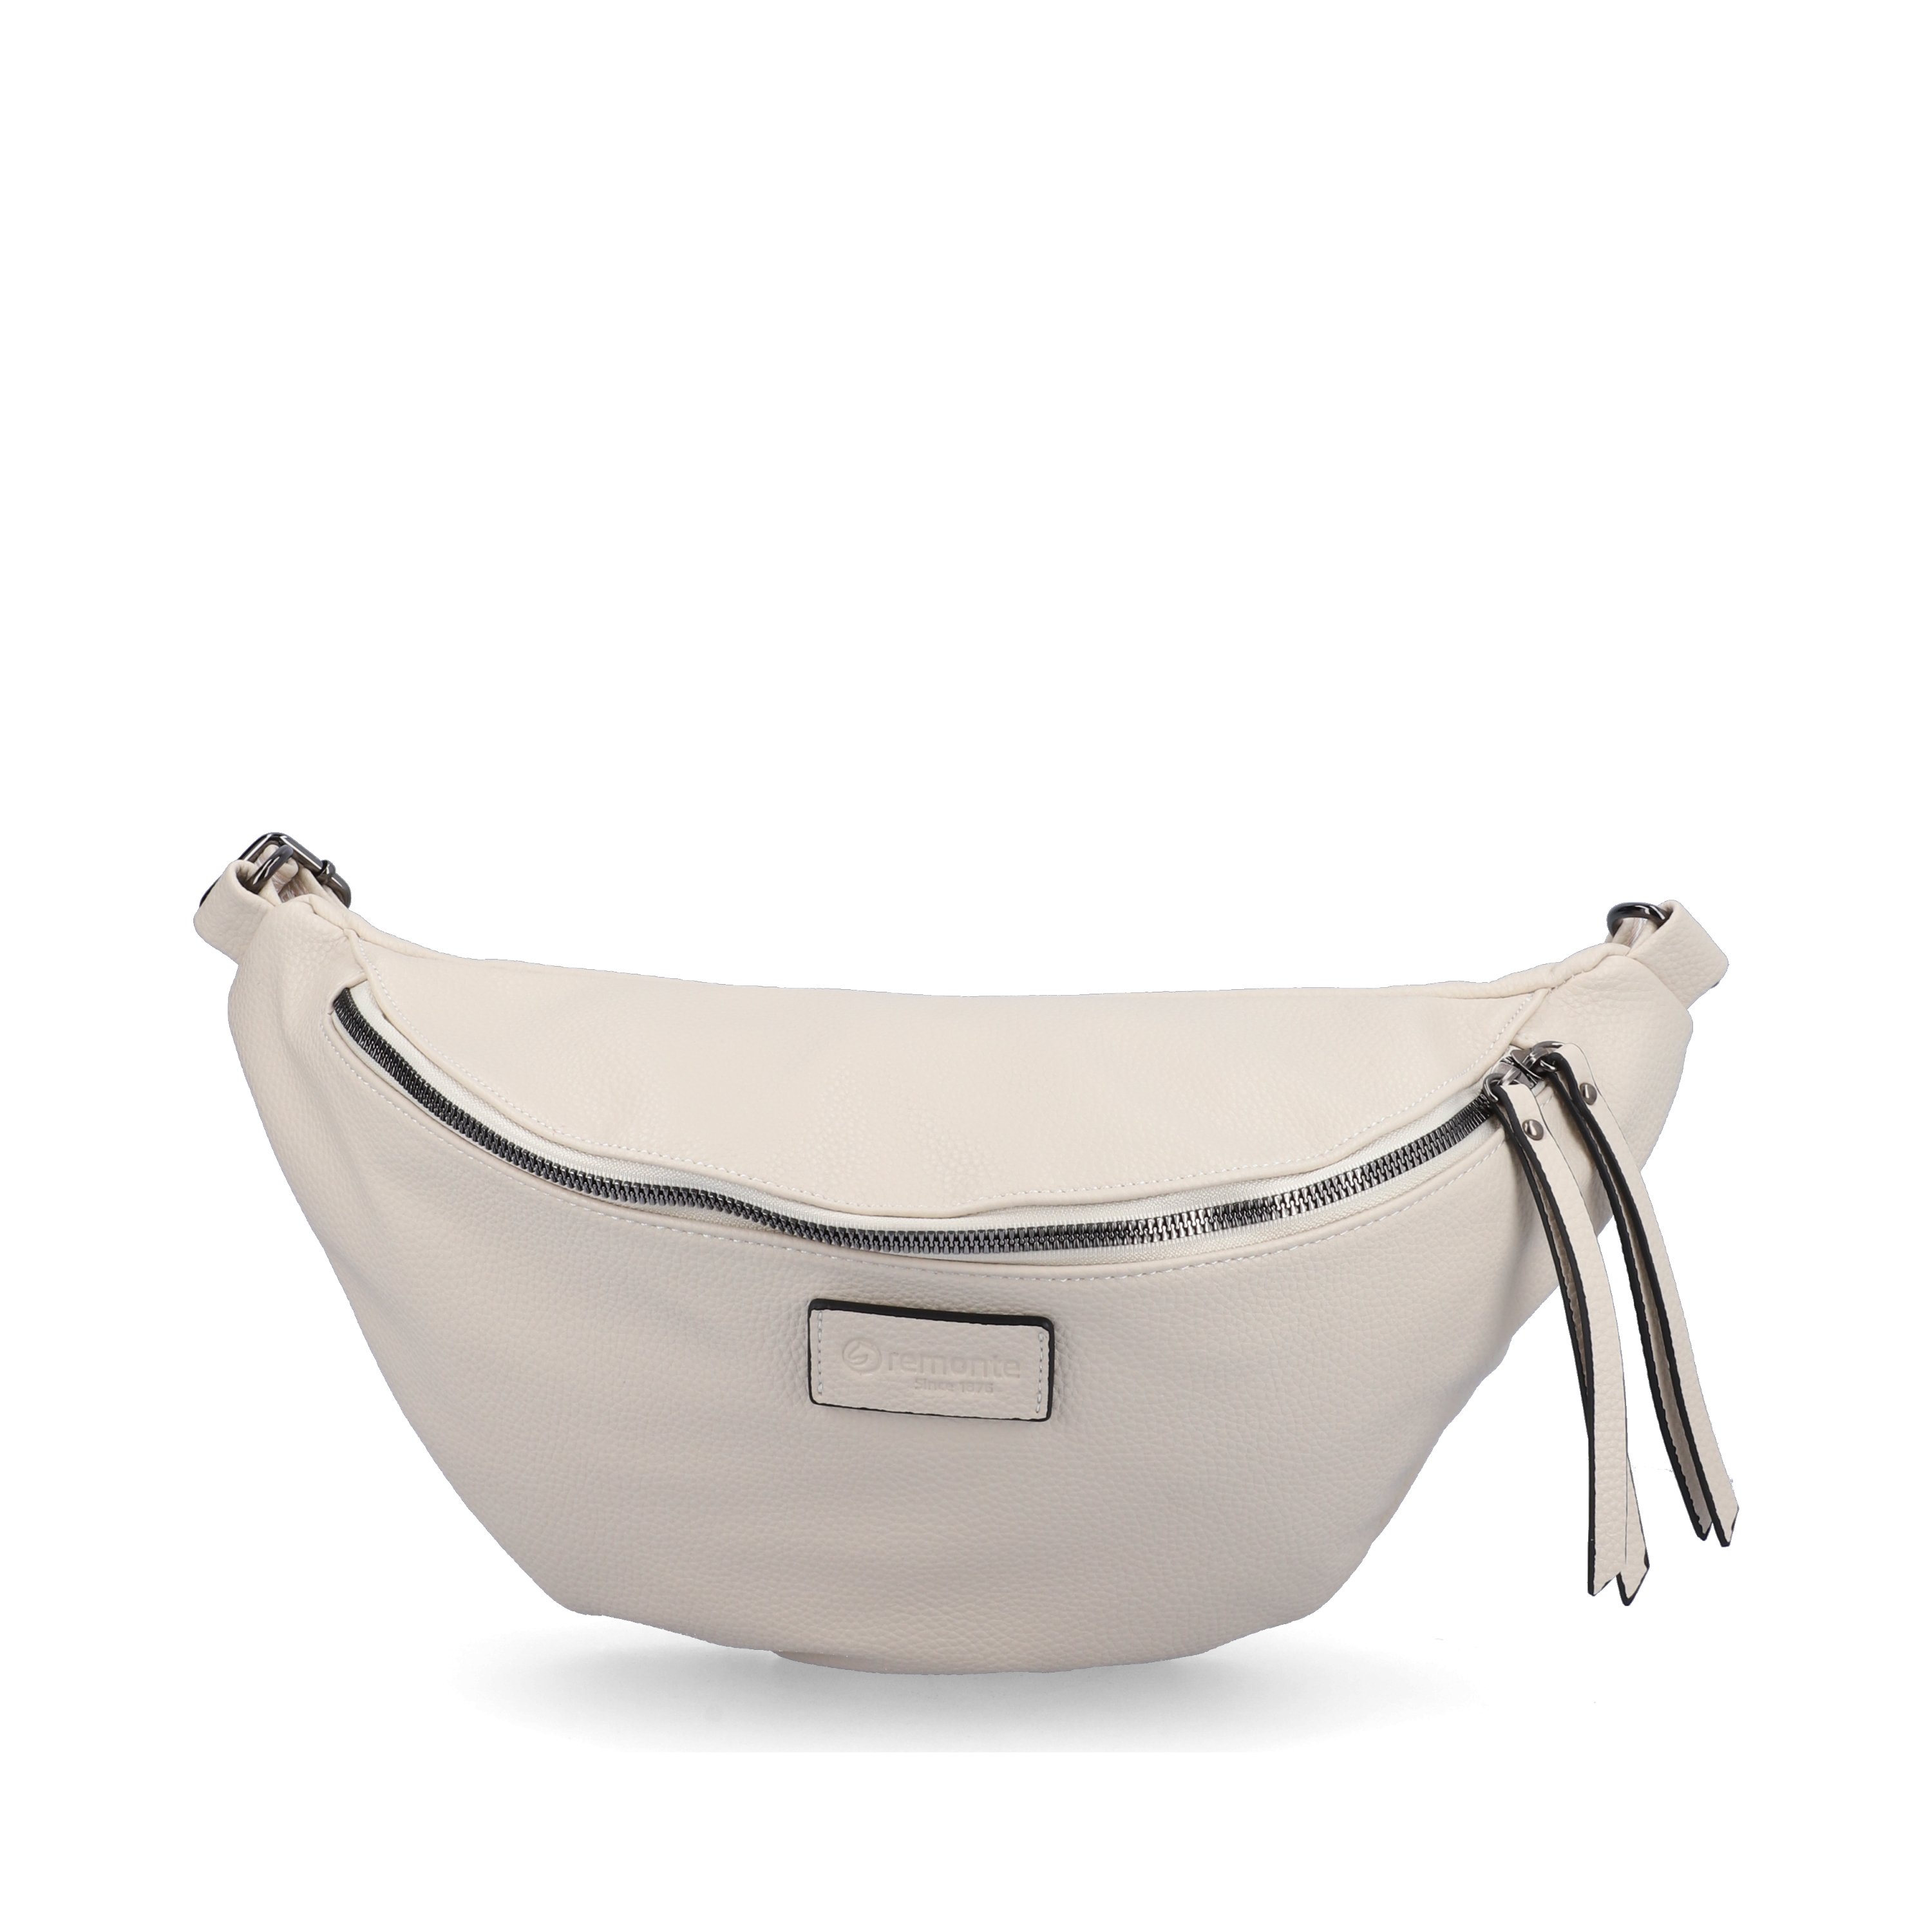 remonte women´s hip bag Q0802-60 in beige made of imitation leather with zipper from the front.